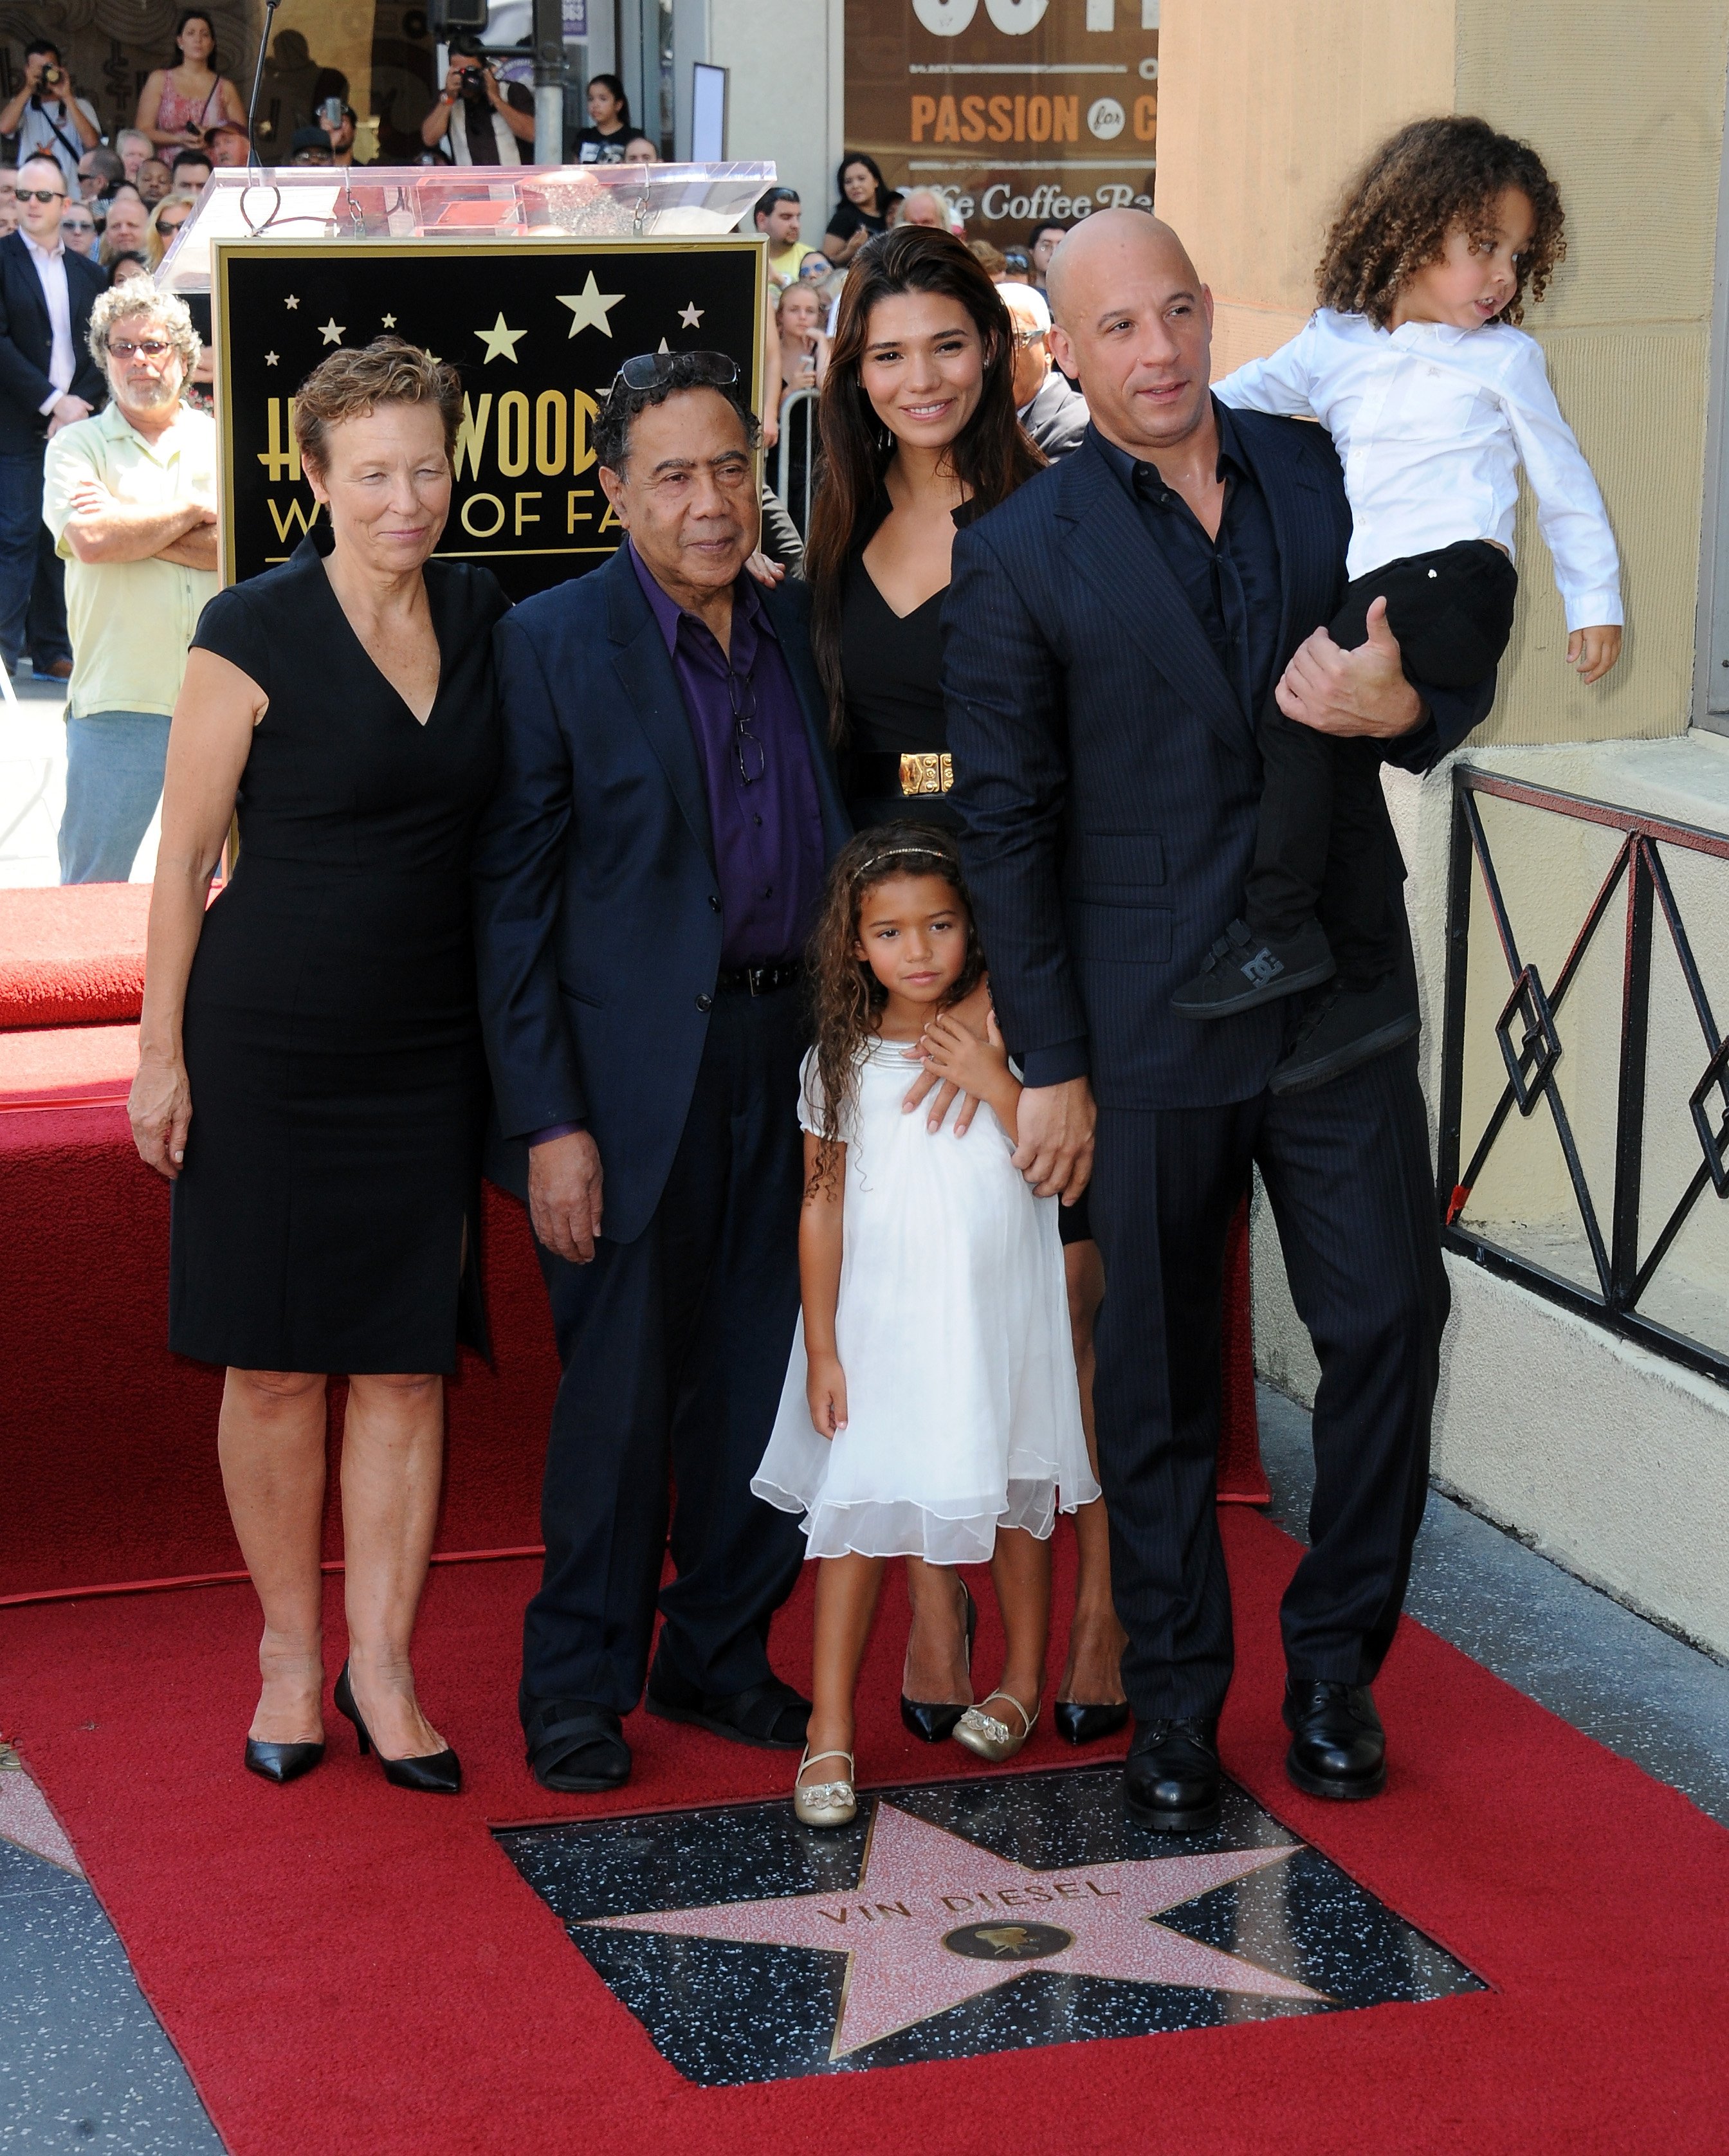 Vin Diesel was honored with a Star On The Hollywood Walk of Fame with his family in attendance on August 26, 2013, in Hollywood, California. | Source: Getty Images